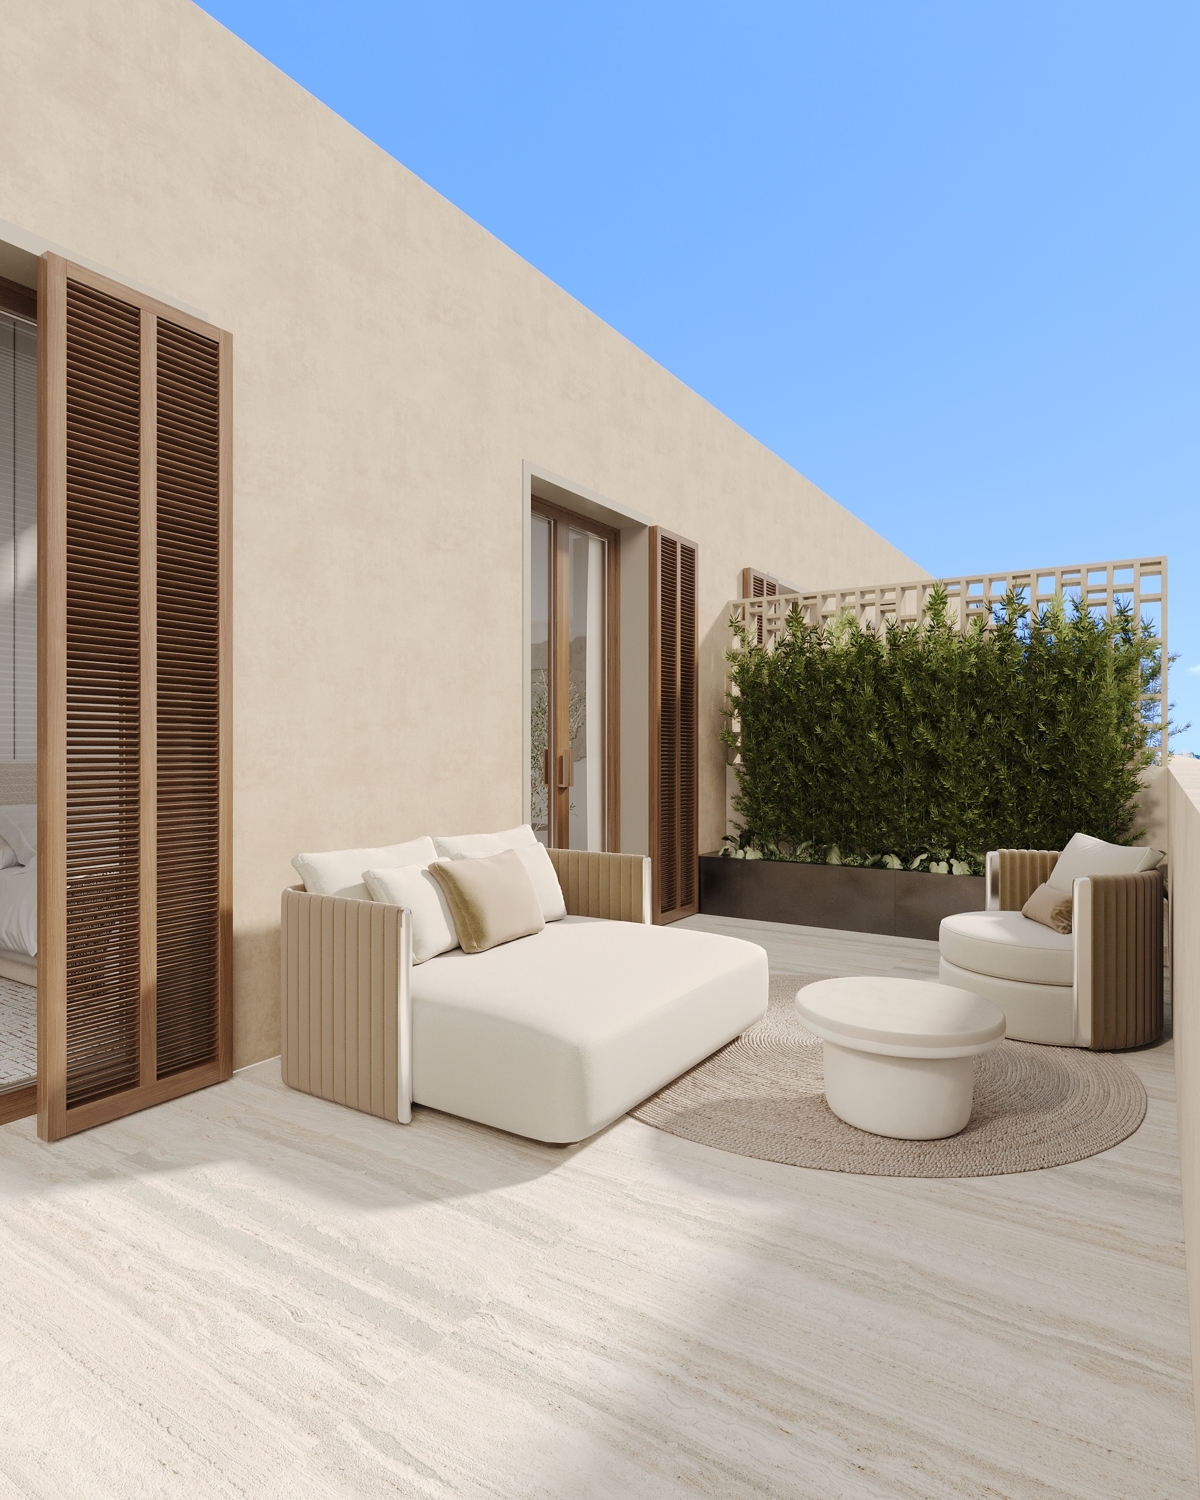 Penthouse mit Pool: Neue Entwicklung in Santa Catalina